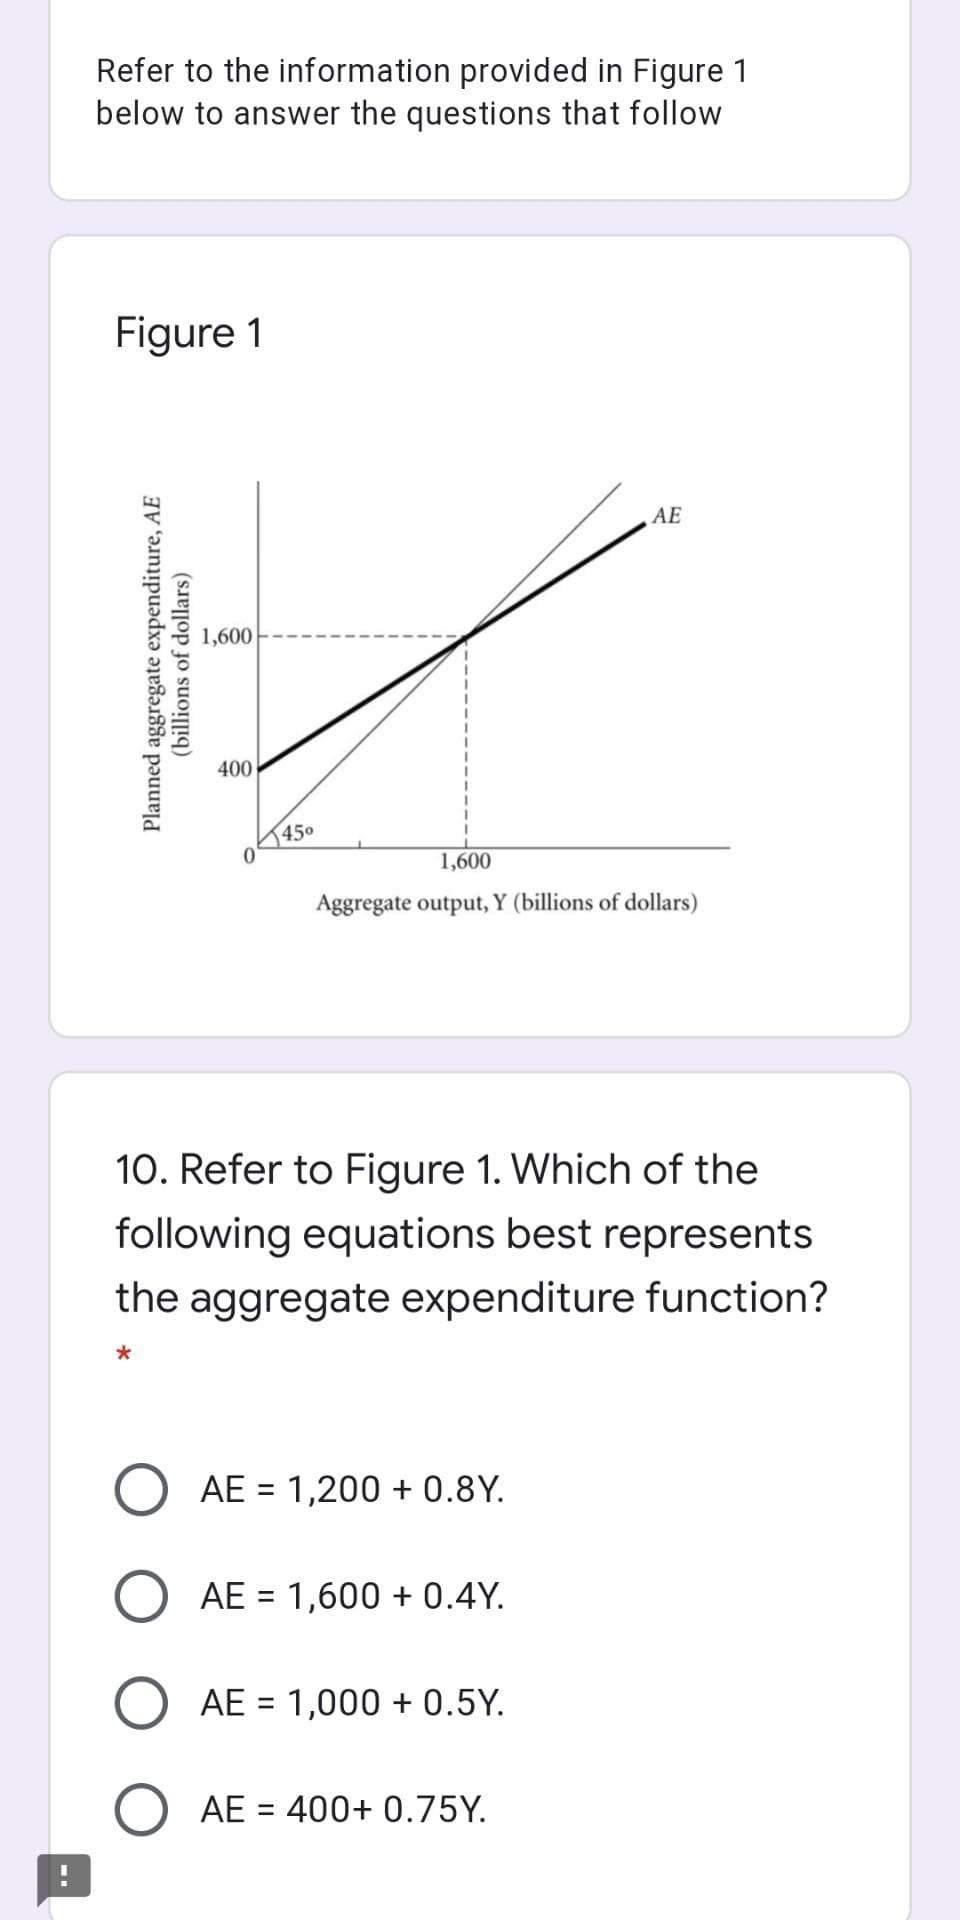 Refer to the information provided in Figure 1
below to answer the questions that follow
Figure 1
AE
1,600
400
S450
1,600
Aggregate output, Y (billions of dollars)
10. Refer to Figure 1. Which of the
following equations best represents
the aggregate expenditure function?
O AE = 1,200 + 0.8Y.
%3D
O AE
1,600 + 0.4Y.
%3D
O AE = 1,000 + 0.5Y.
%3D
AE = 400+ 0.75Y.
Planned aggregate expenditure, AE
(billions of dollars)
